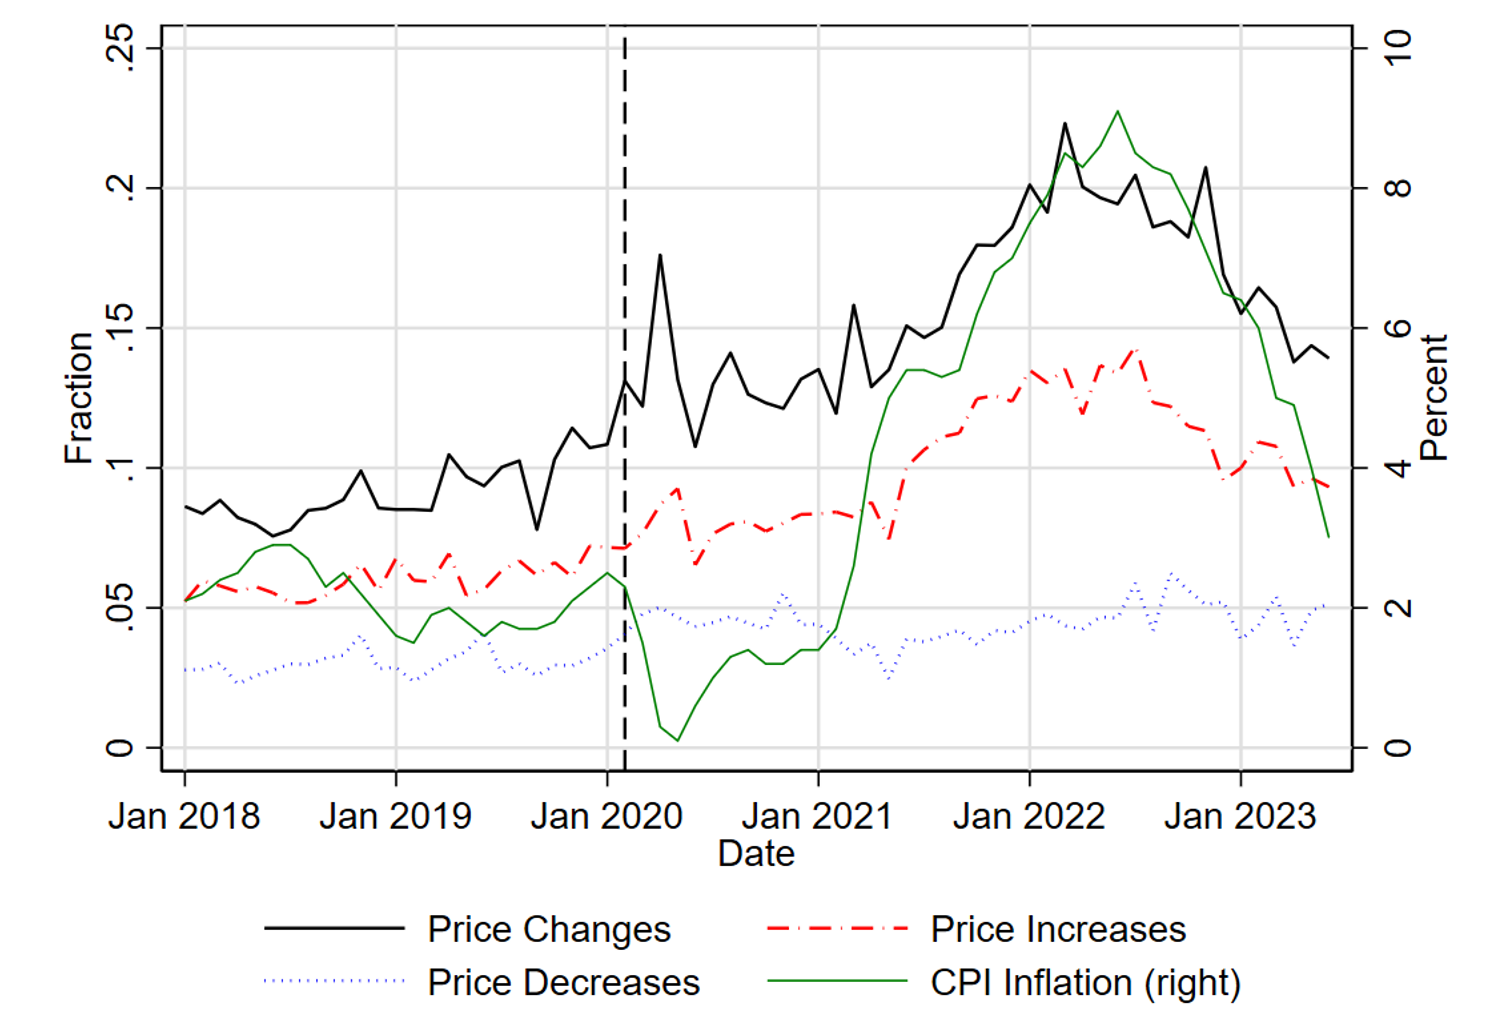 Figure 3. Frequency of Price Changes, Increases and Decreases. See accessible link for data.